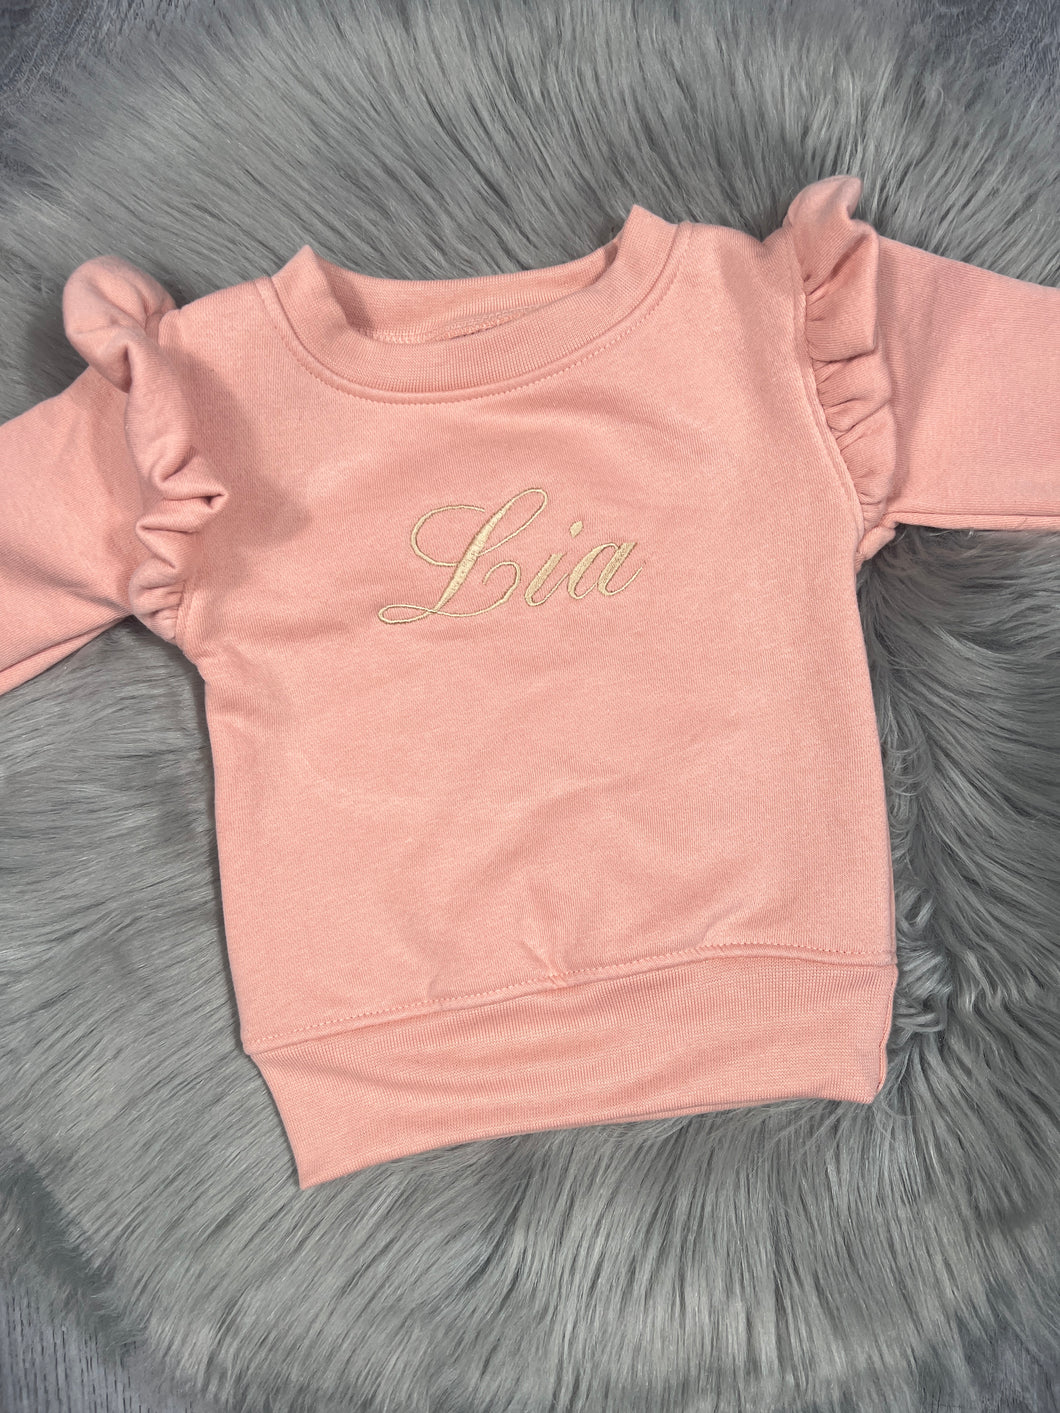 Personalised Children's Embroidered Frill Sweatshirt. Pink